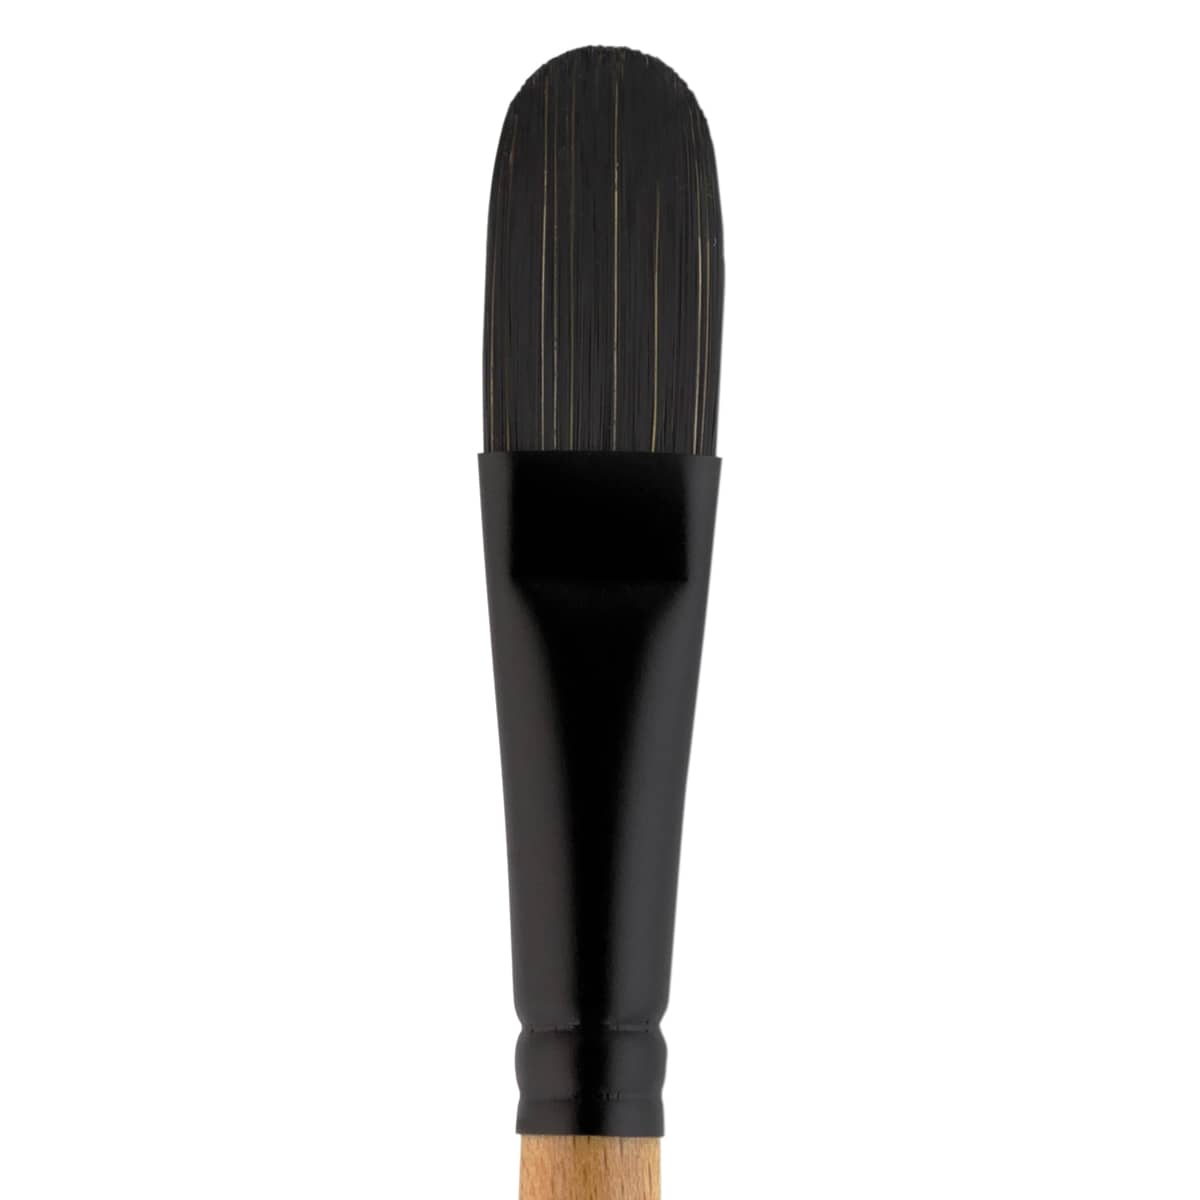 Set of 2 2 inch European Professional Flat Paint Brushes - Natural Bristle Wooden Handle - for Acrylic, Chalk, Oil, Watercolor, Gouache, Stain